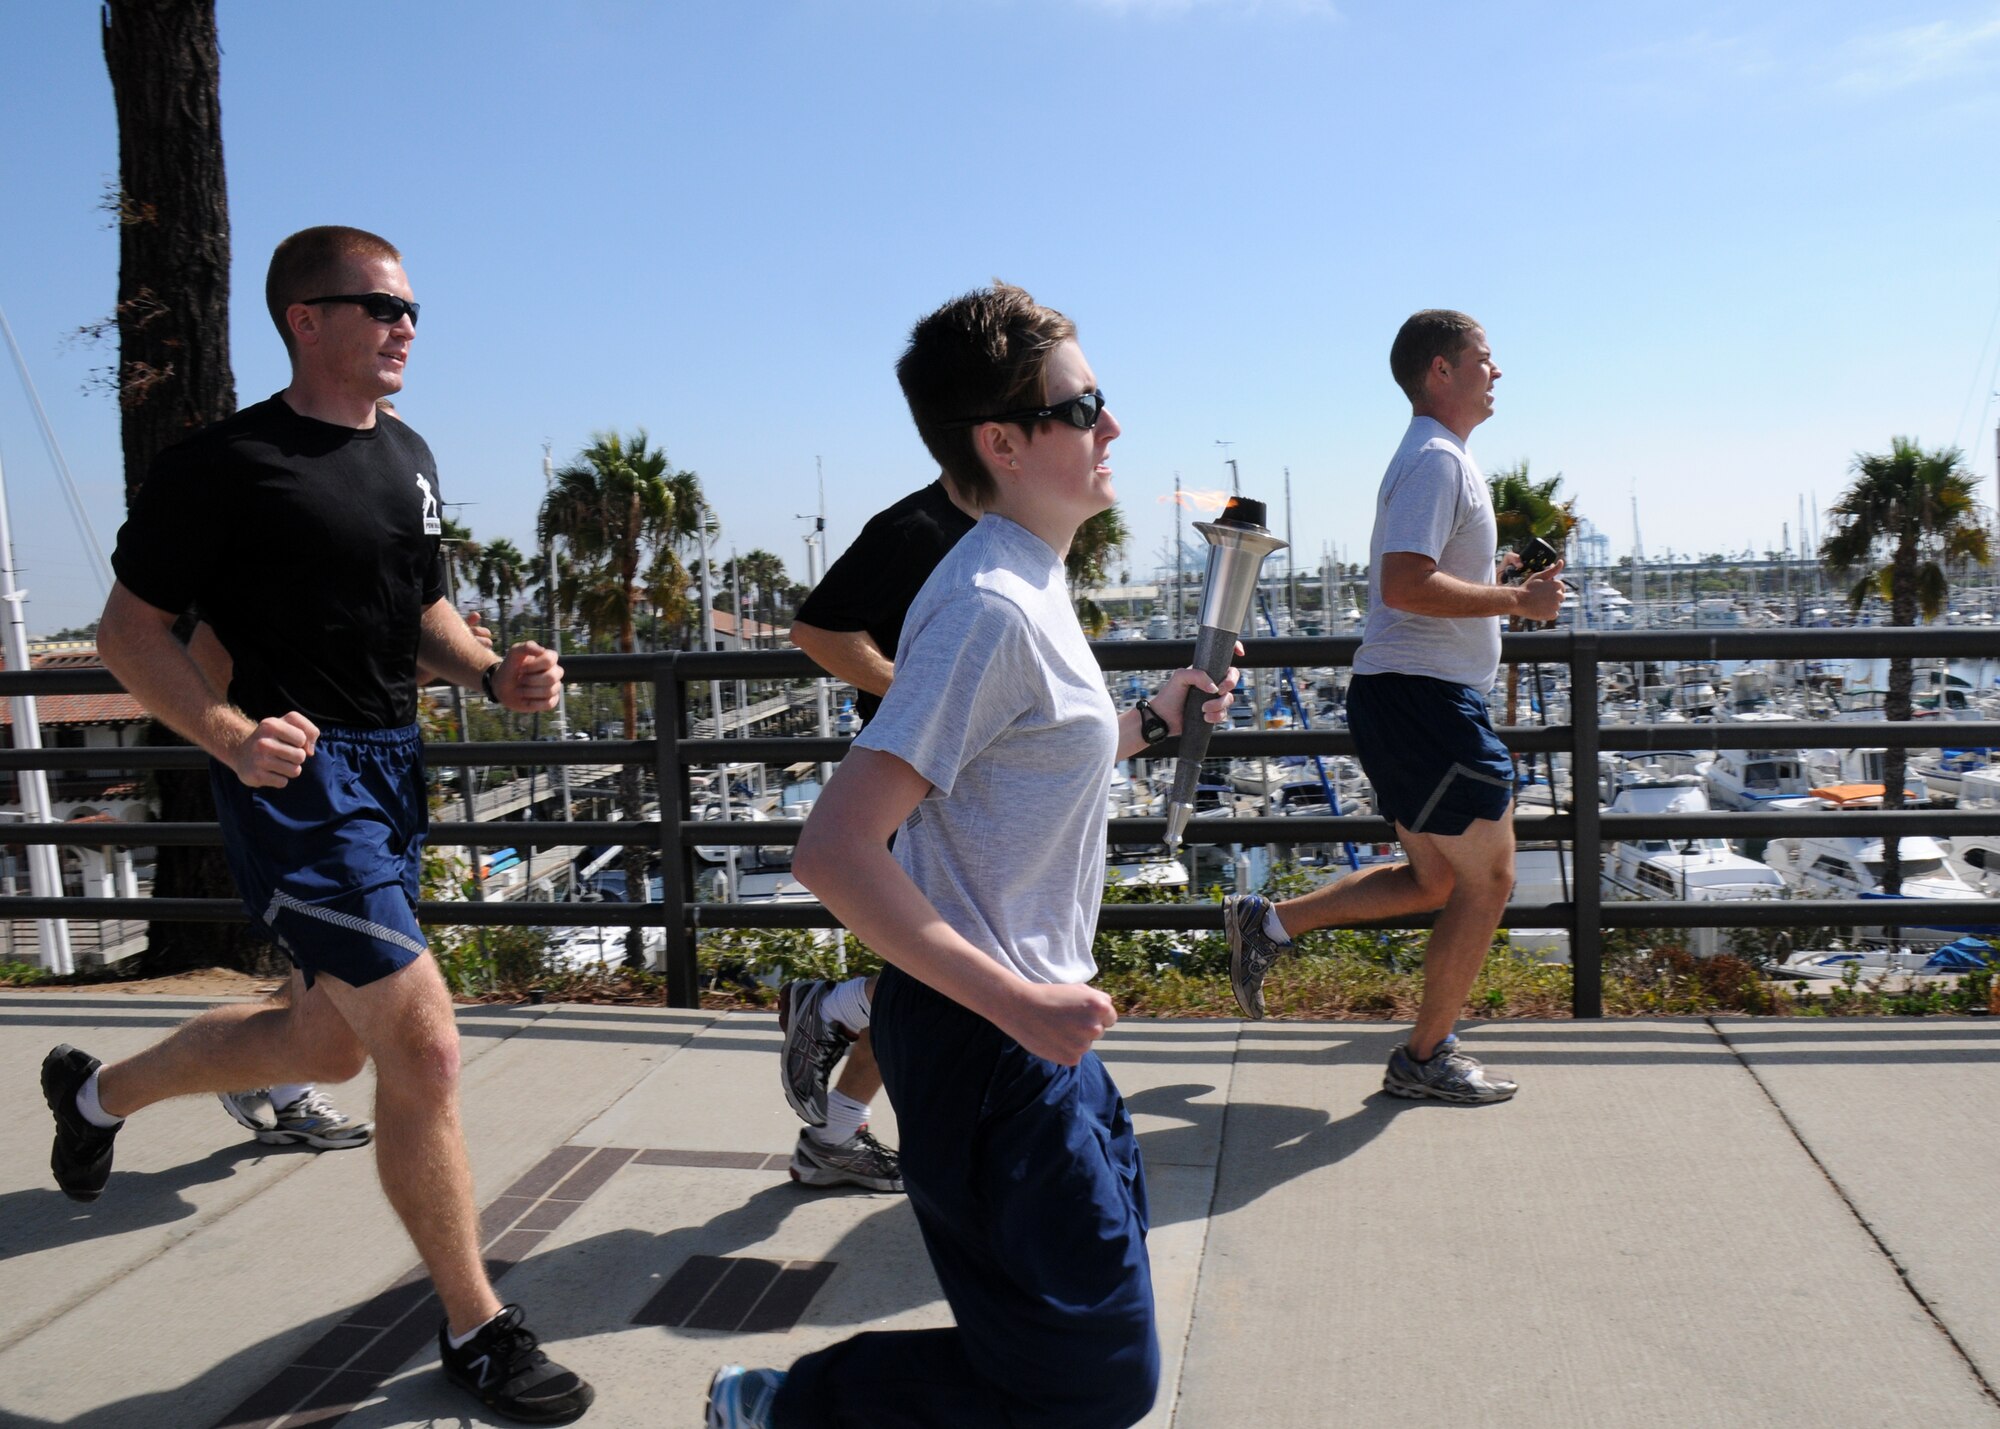 Runners pass by the Cabrillo Marina during the 24-hour POW-MIA torch relay run, Sept. 18. The event sponsored by the Los Angeles Air Force Base Company Grade Officers Council began at Terminal Island Coast Guard Base in San Pedro and concludes 54 miles later at Los Angeles AFB in El Segundo. (Photo by Joe Juarez)